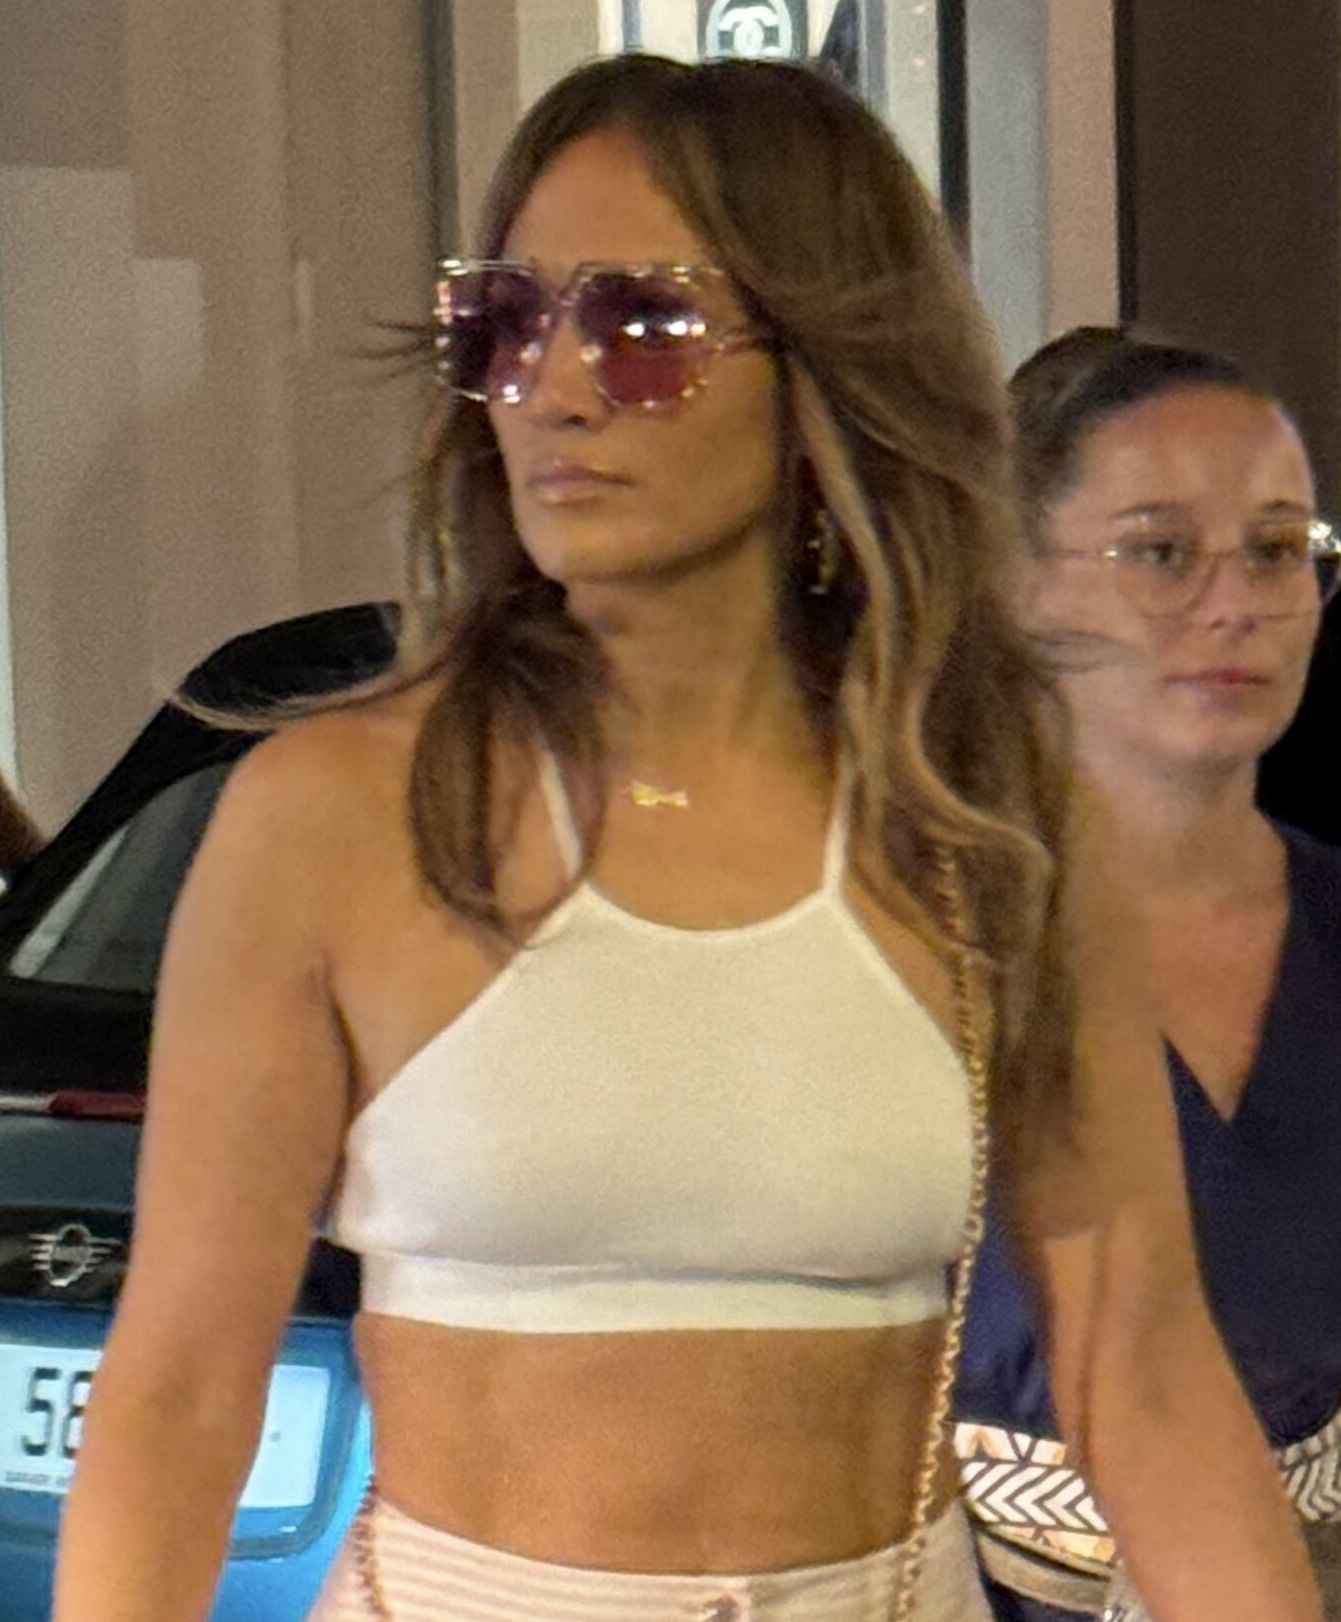 JLo spent time shopping by herself in Gusavia away from her husband Ben Affleck